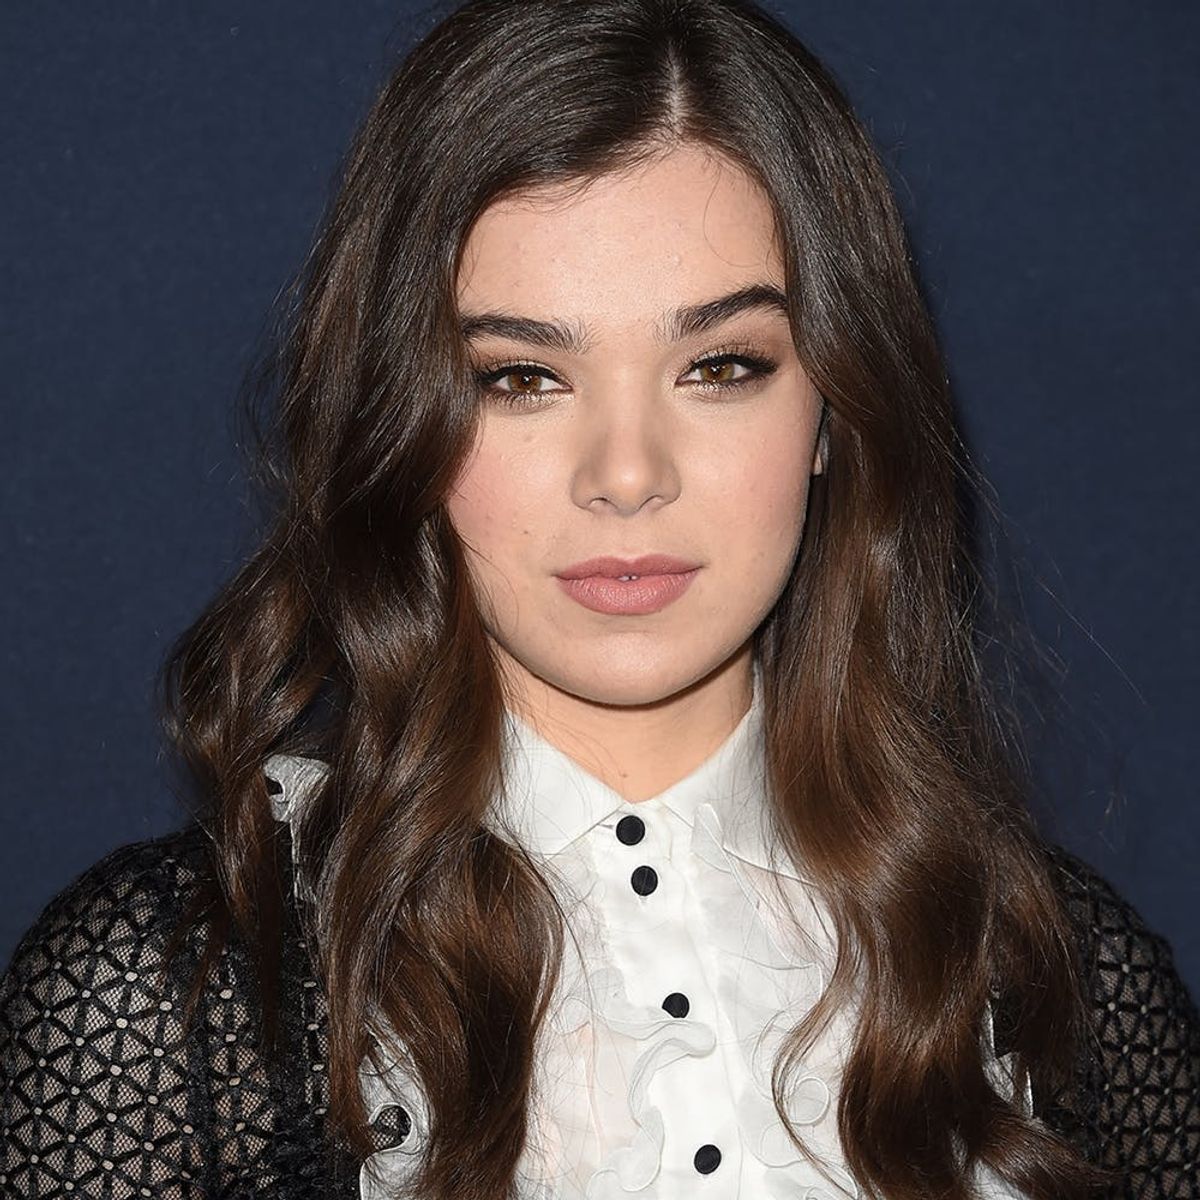 Hailee Steinfeld Is the Latest Celeb to Go Bronde